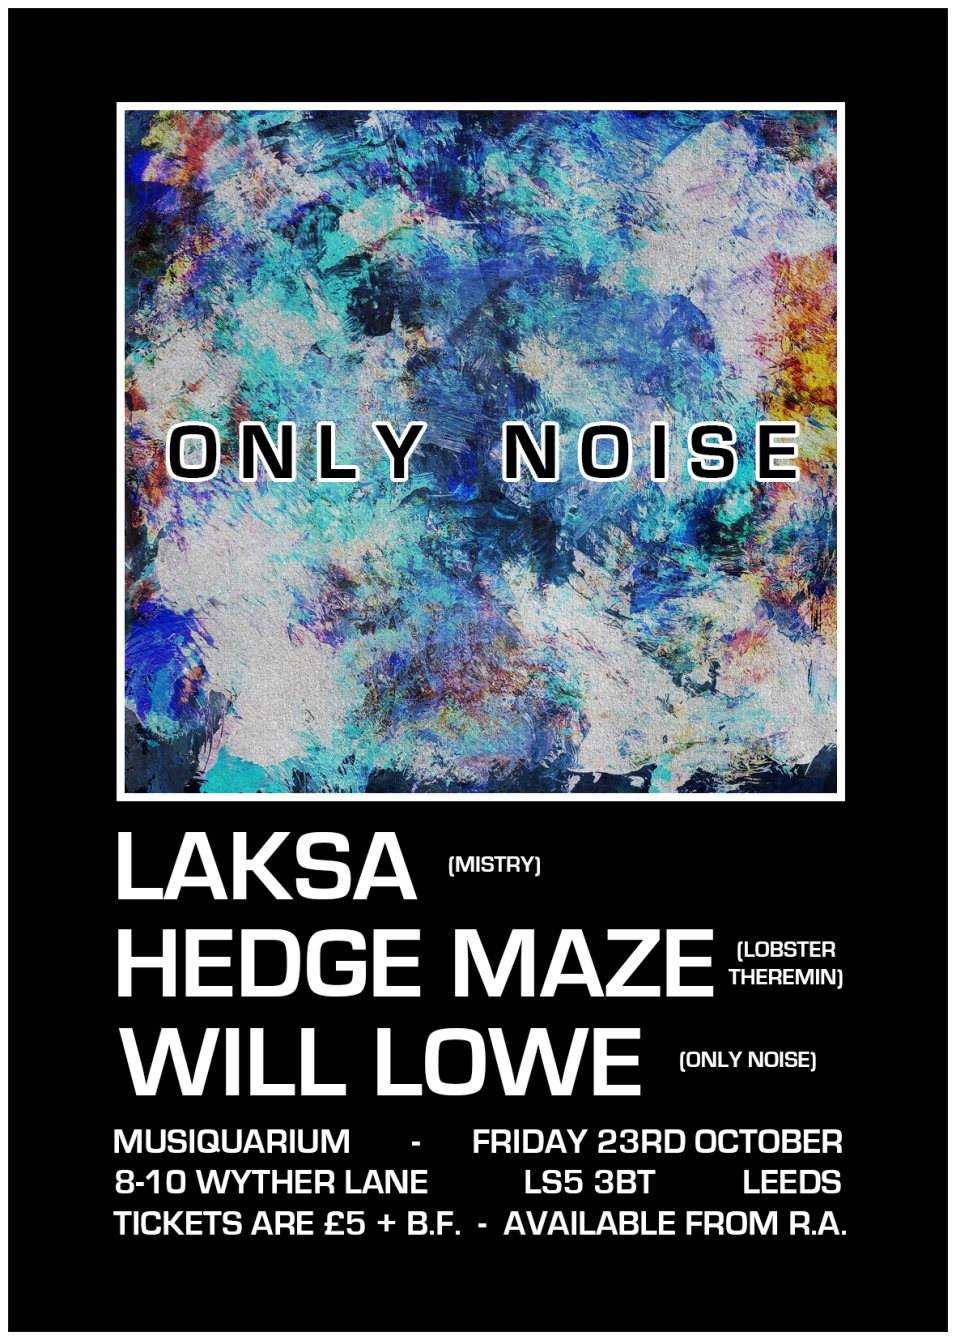 Only Noise presents: Laksa, Hedge Maze & Will Lowe - Página frontal